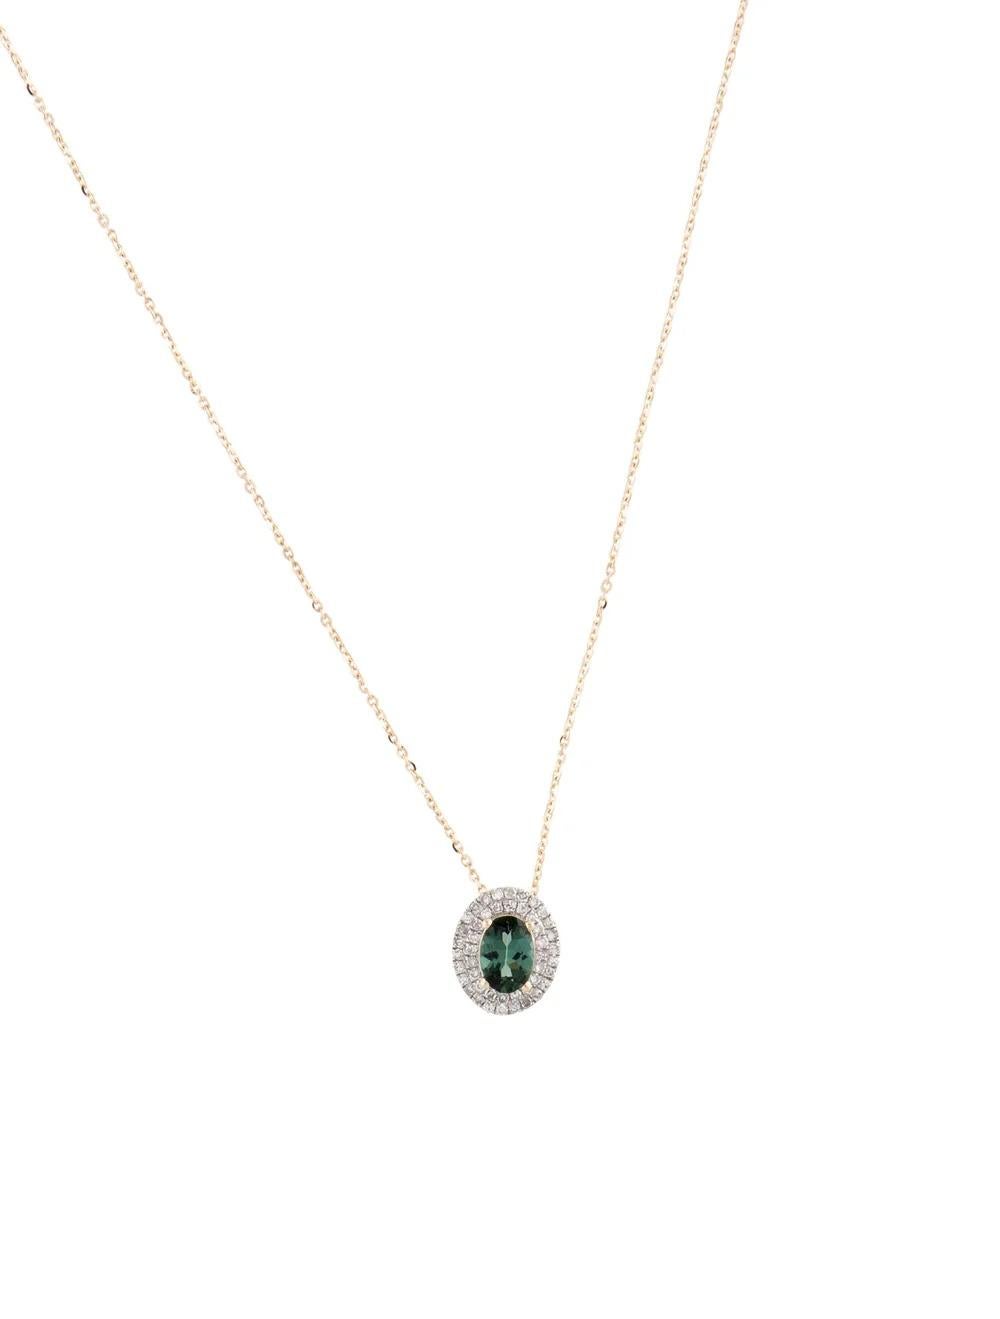 This exquisite pendant necklace features a harmonious blend of rhodium-plated and 14K yellow gold, creating a stunning contrast that enhances its overall allure. The focal point of this piece is an elegant oval modified brilliant tourmaline, exuding